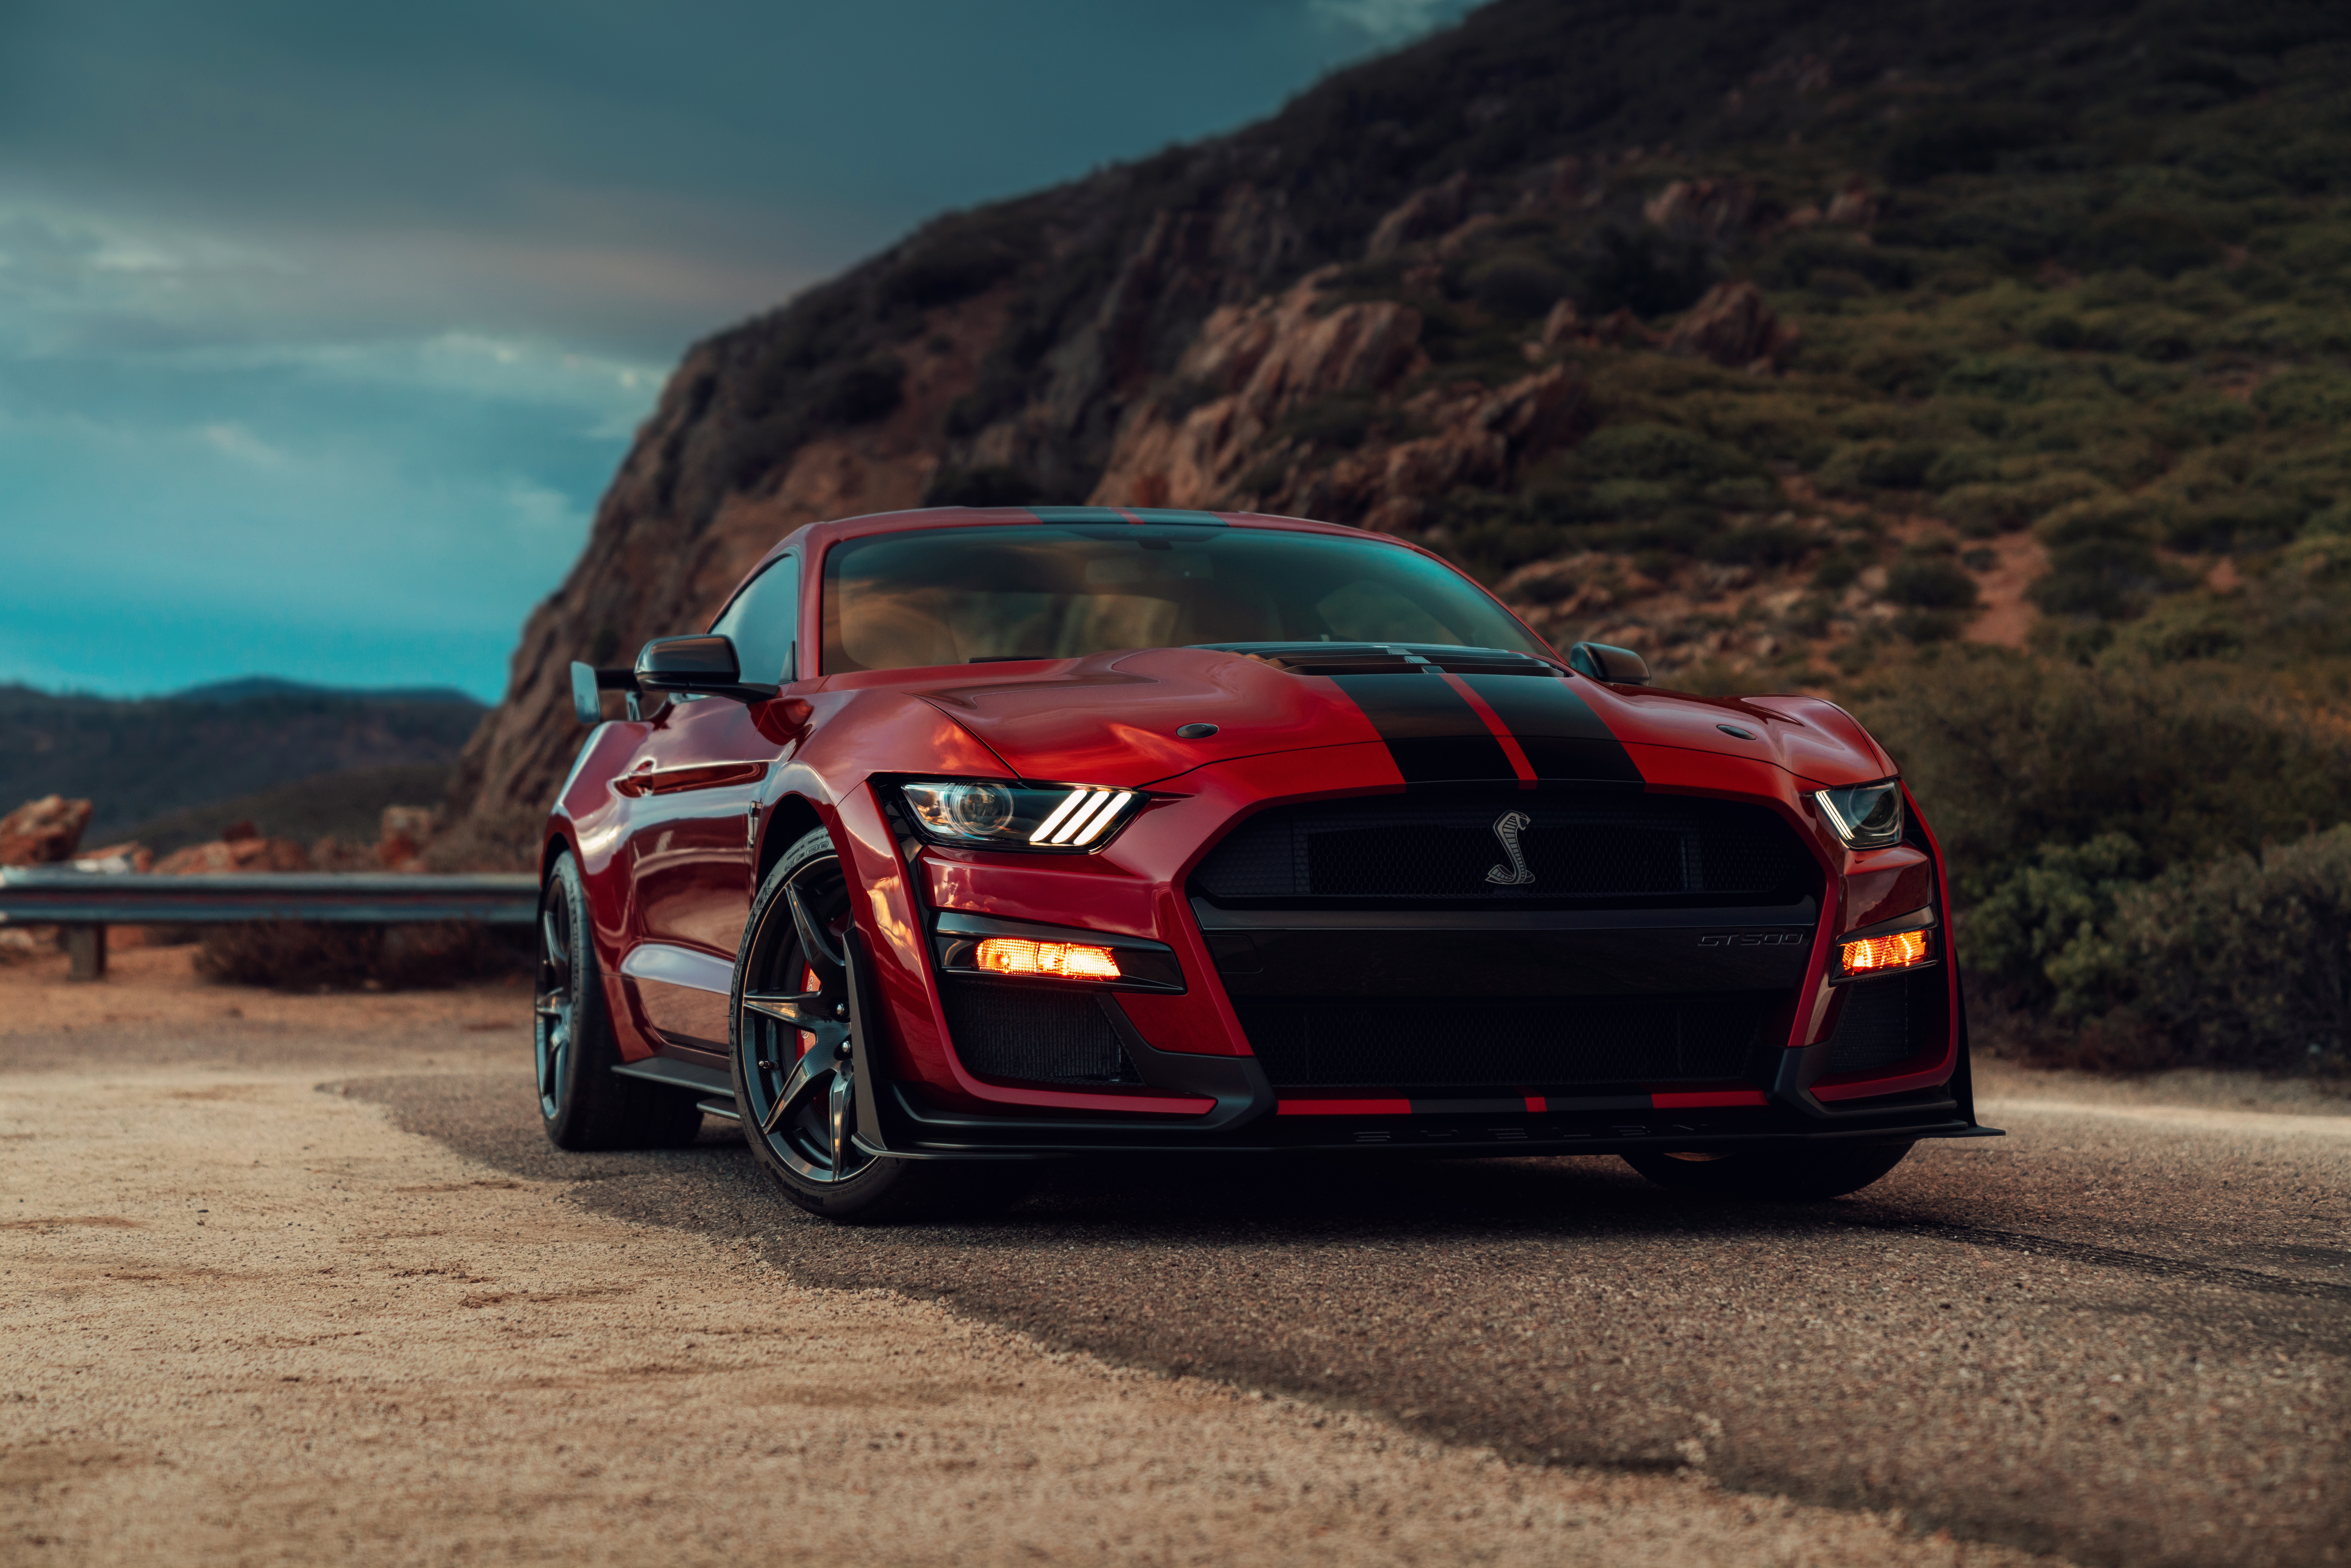 Car Ford Ford Mustang Ford Mustang Shelby Ford Mustang Shelby Gt500 Muscle Car Red Car Vehicle 7952x5304